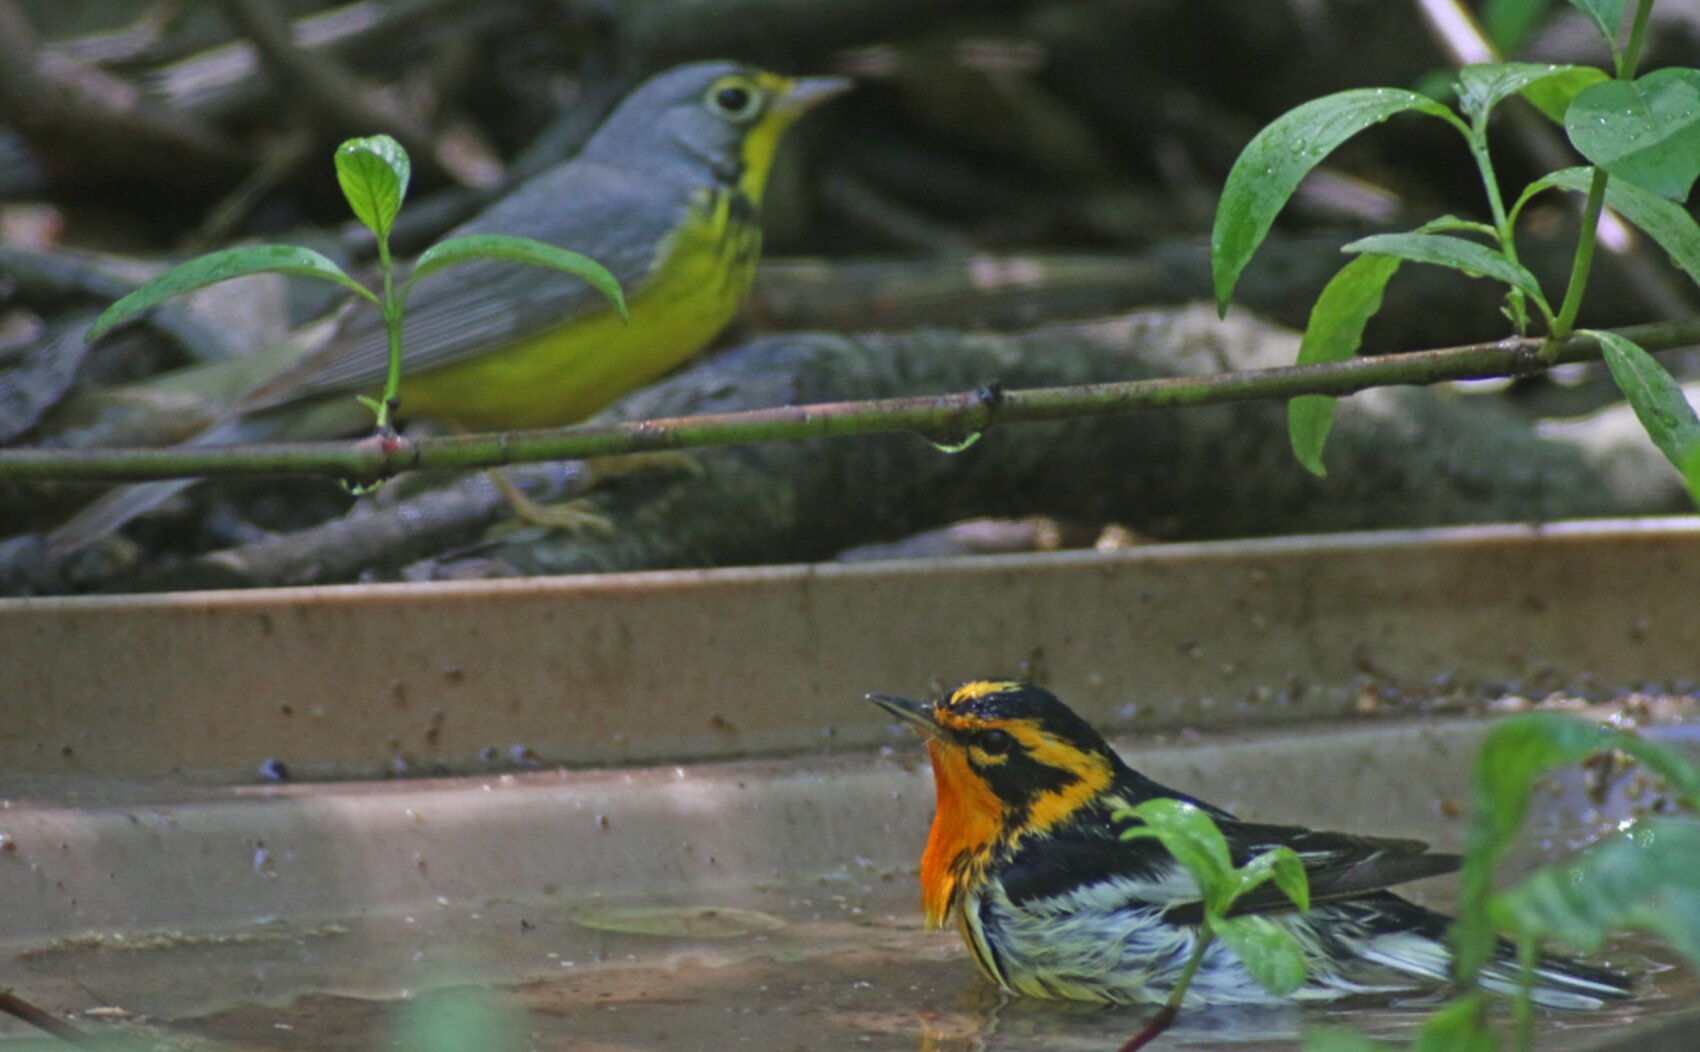 Coveted songbirds like this Blackburnian Warbler and Canada Warbler flock to the Forest Park Water Hole during migration. Photo: <a href="http://www.10000birds.com/author/corey" target="_blank">Corey Finger</a>